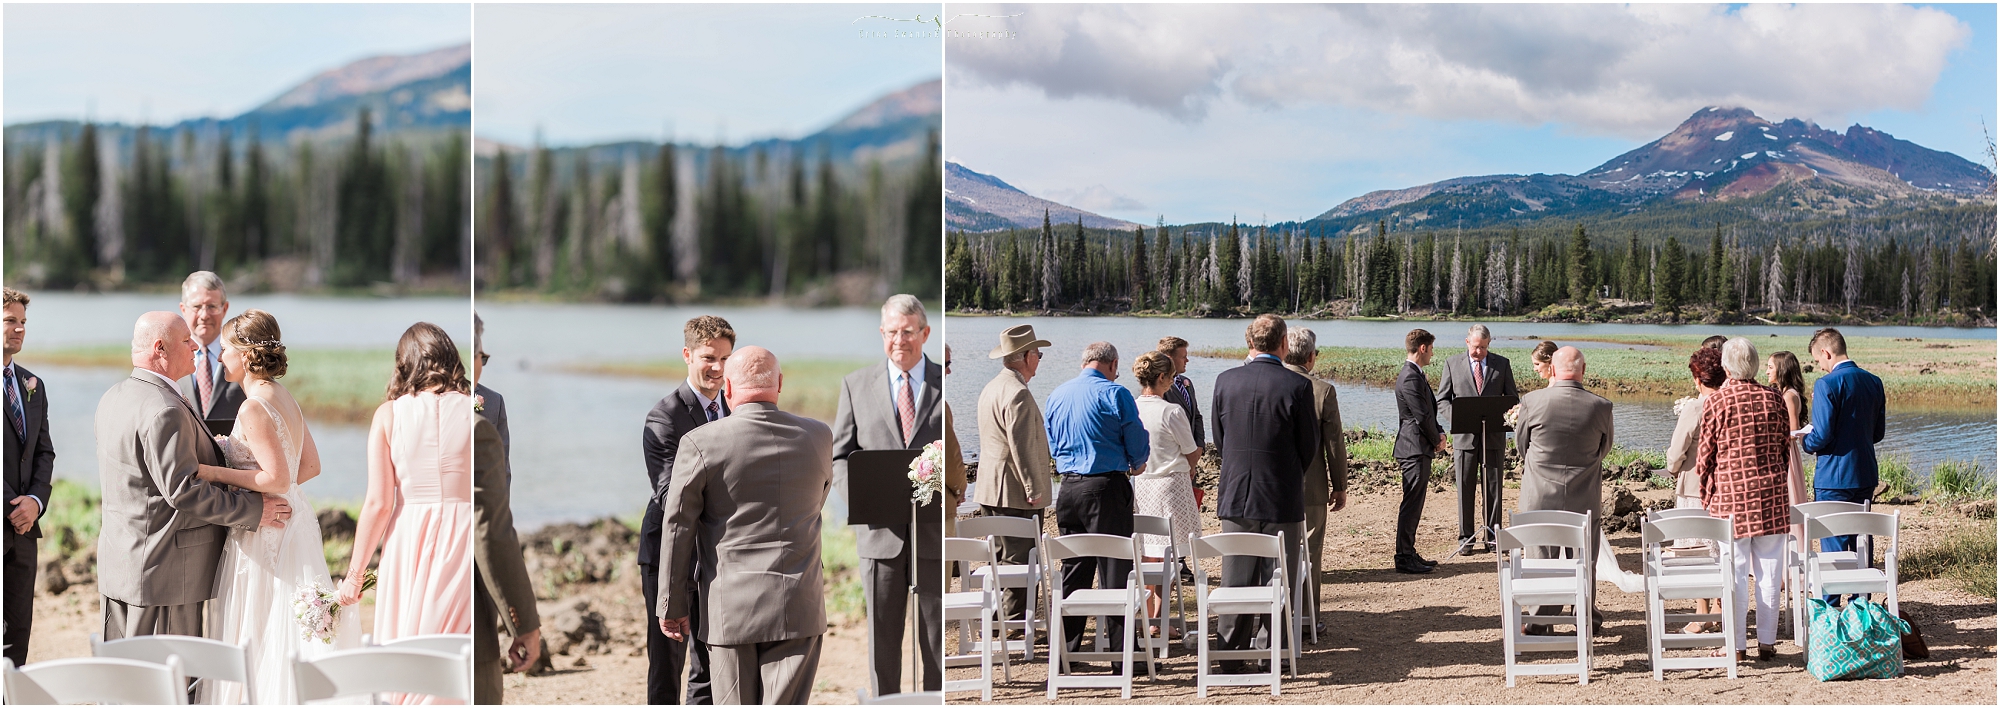 A stunning Oregon elopement on the banks of Sparks Lake in the high Cascade Mountains near Bend, OR. 